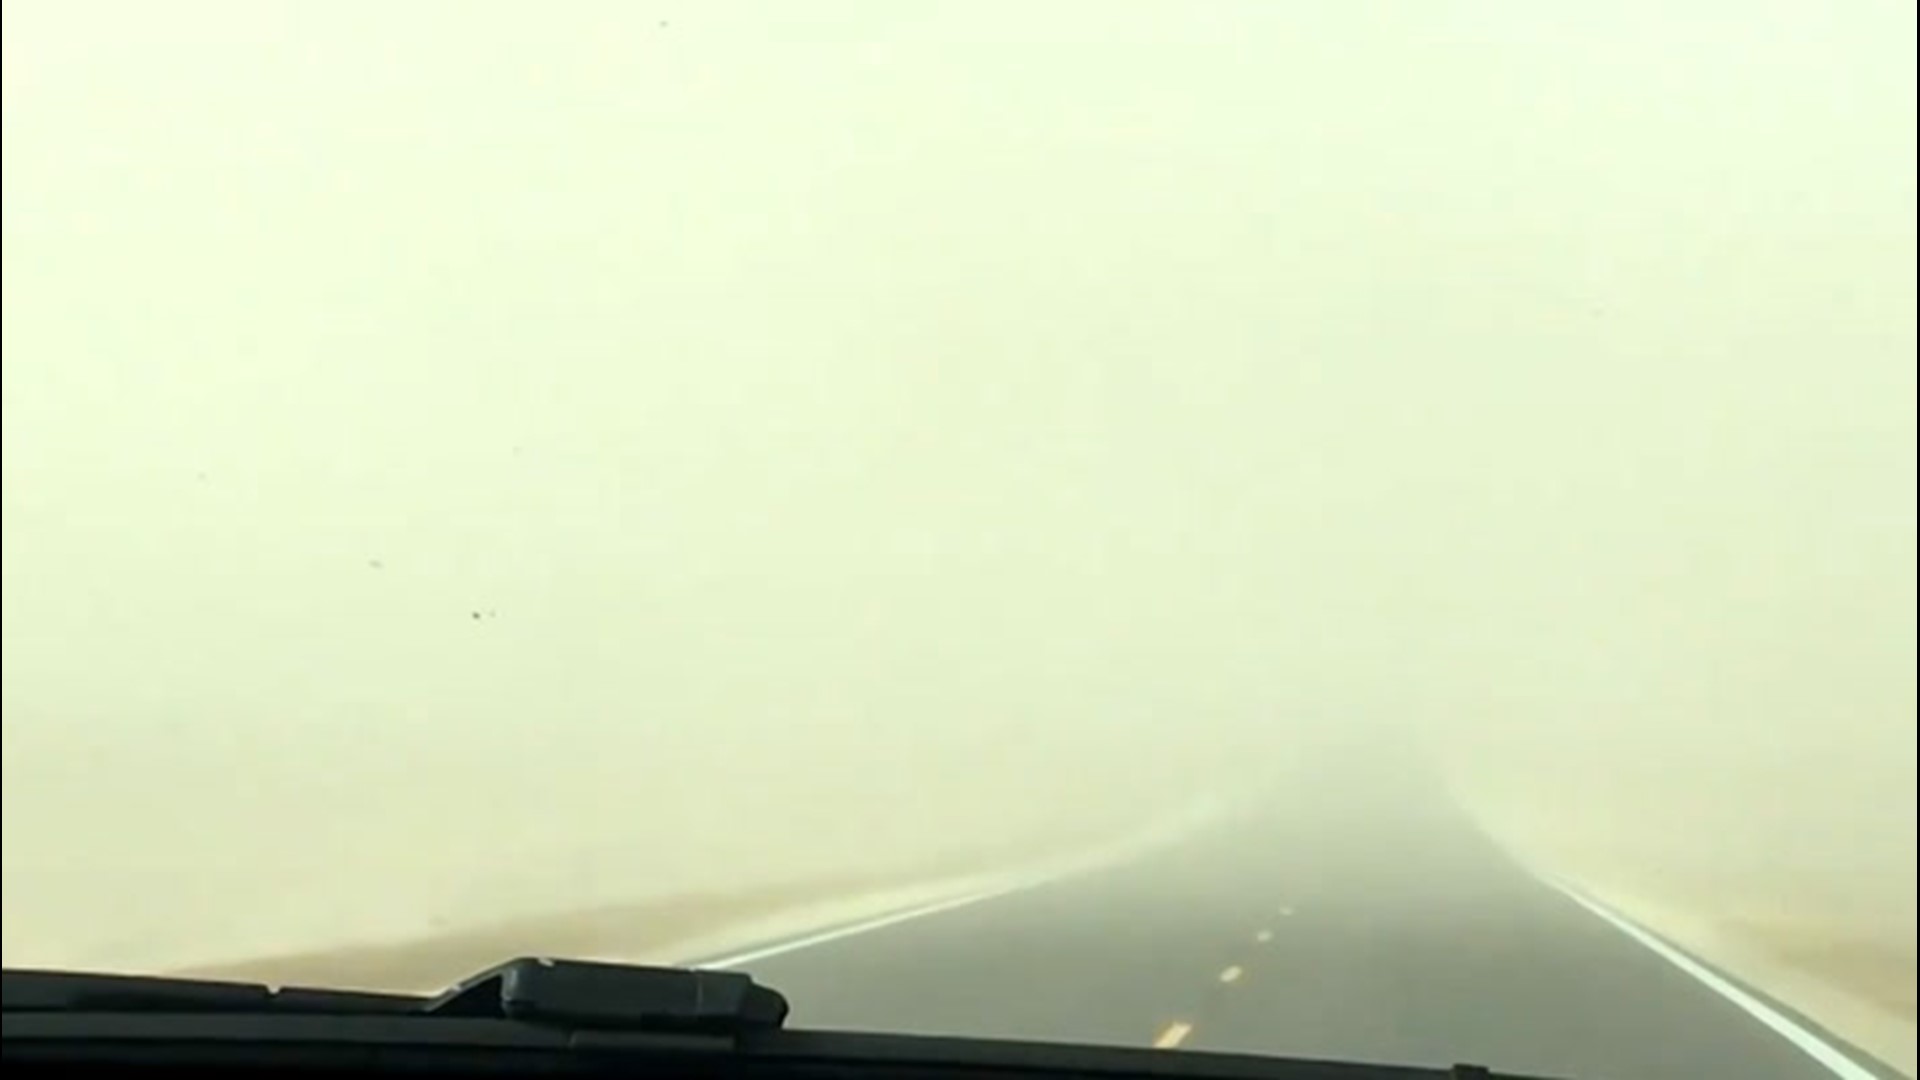 A dust storm caused several crashes due to high winds and low visibility on Jan. 17, with one fatality reported. This video shows visibility greatly reduced on a road in Cheyenne County, Colorado.